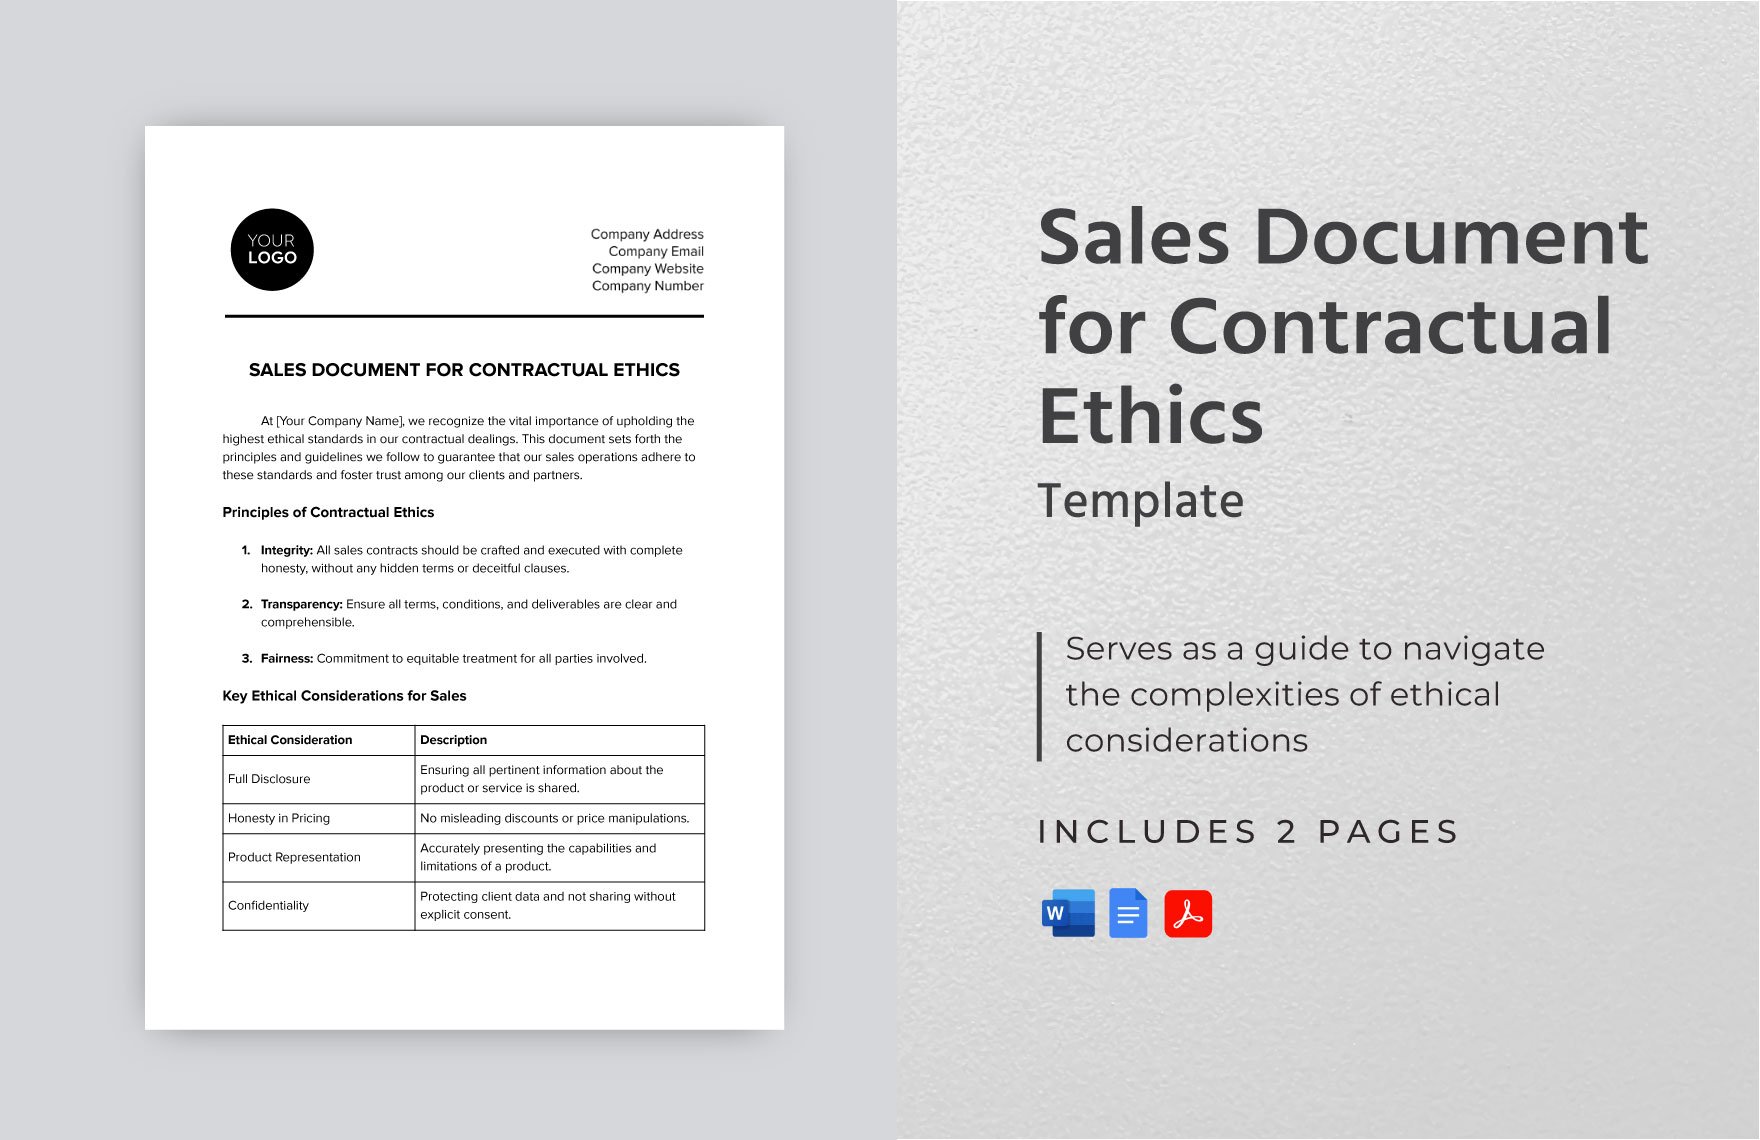 Sales Document for Contractual Ethics Template